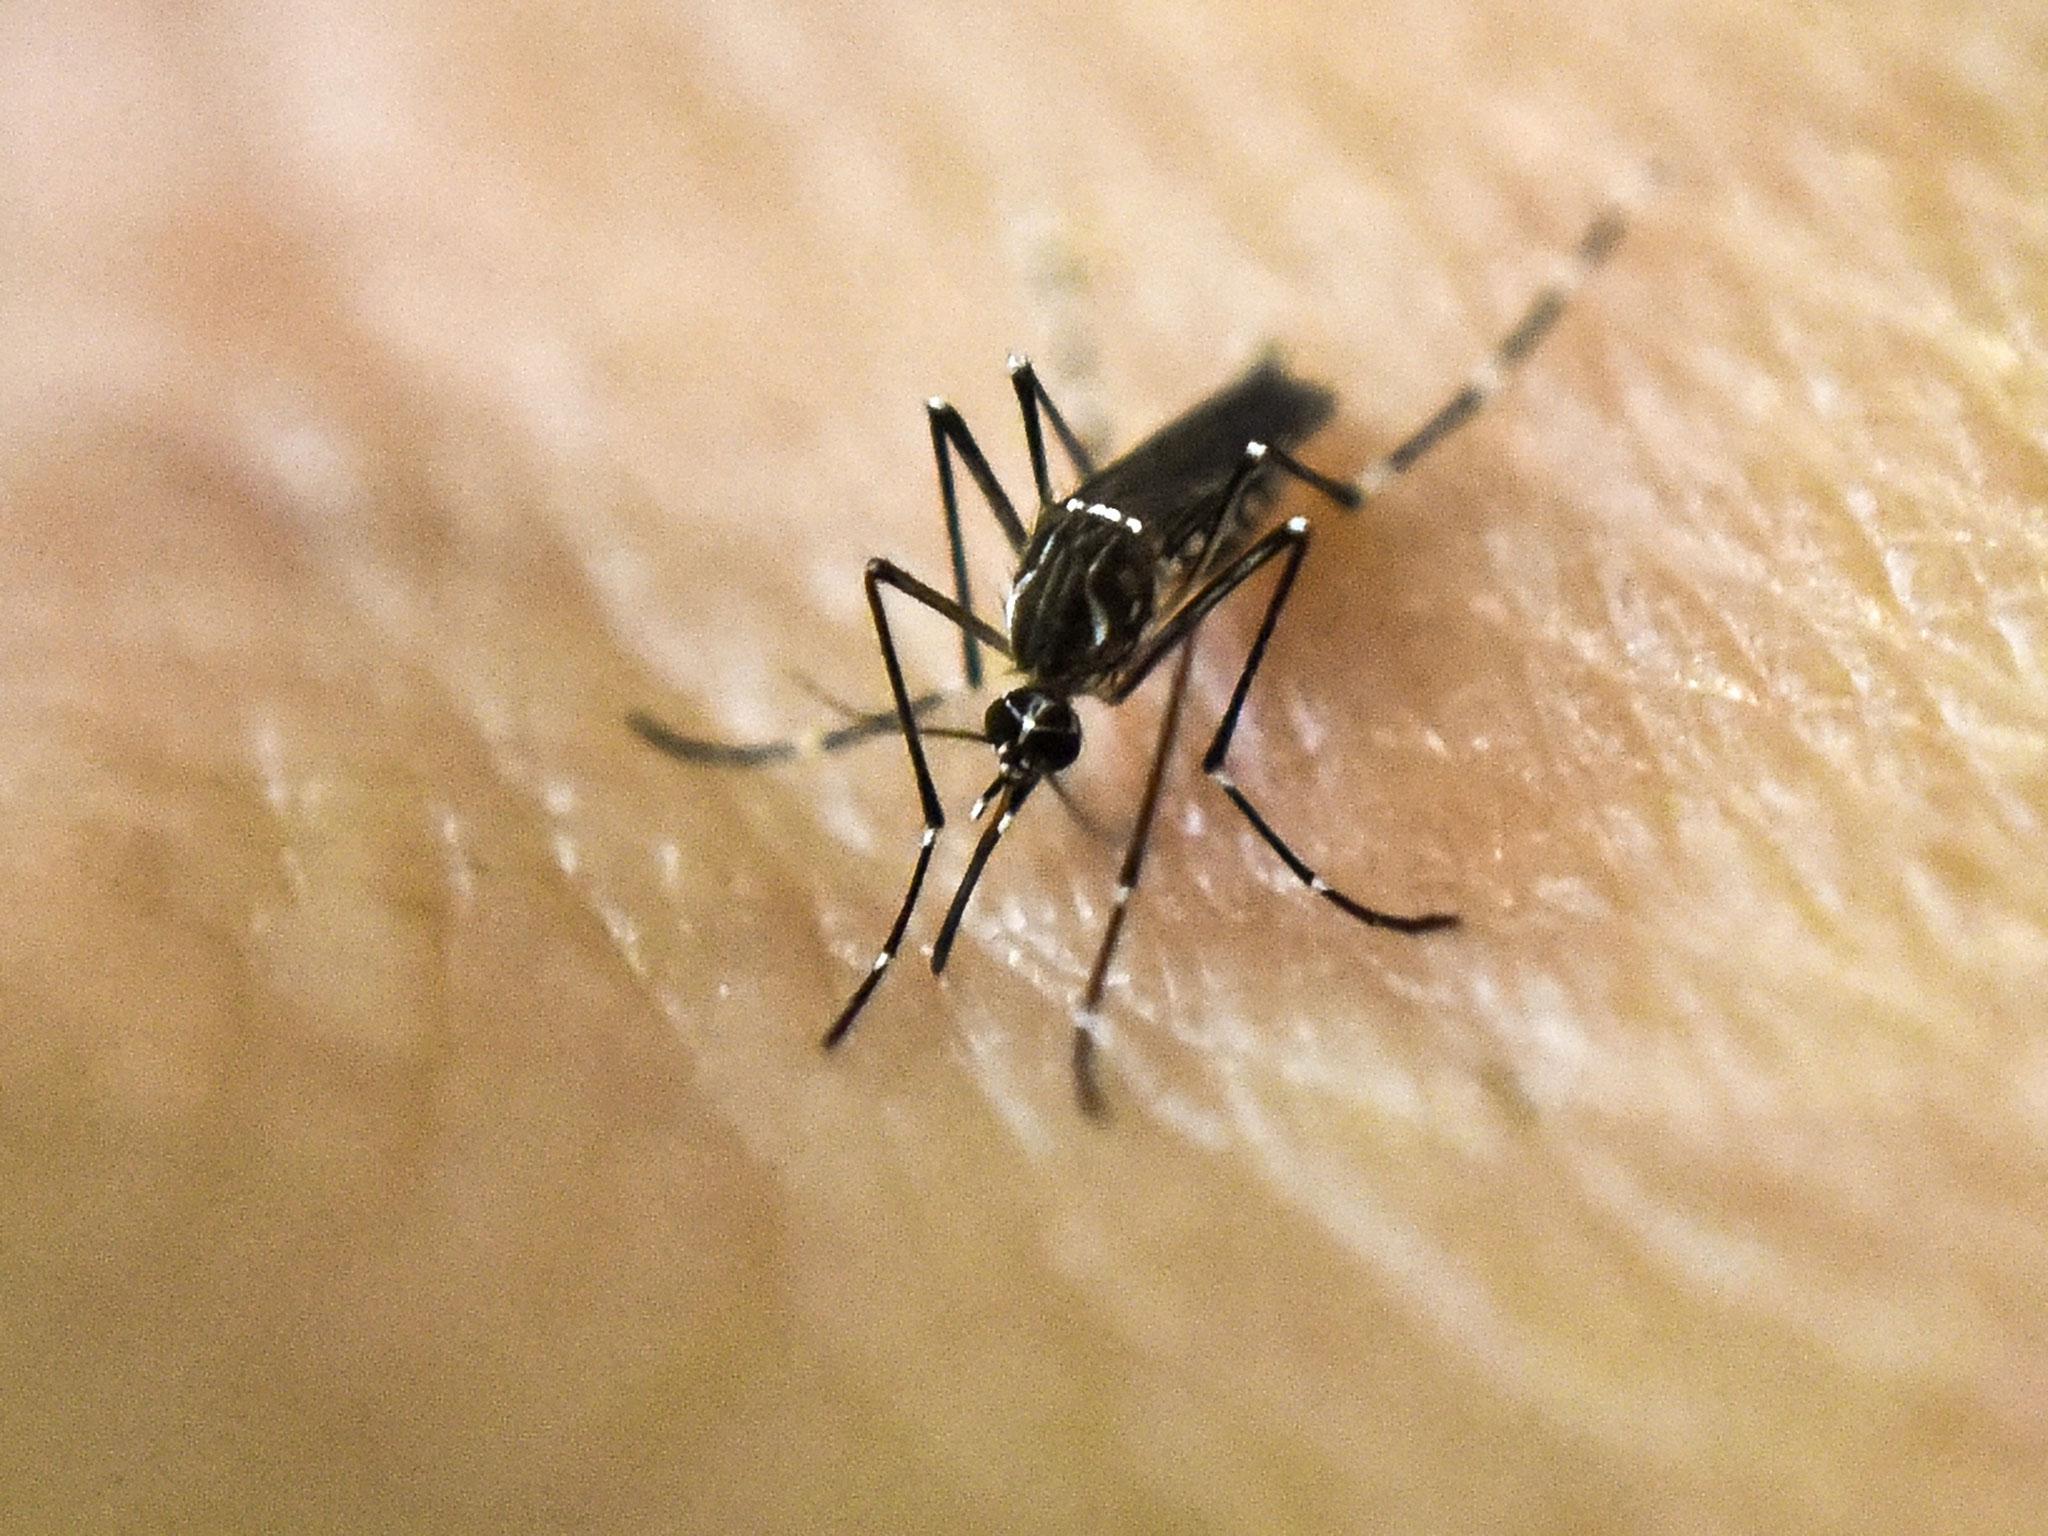 The Aedes Aegypti mosquito transmits the Yellow Fever, Zika and Dengue viruses